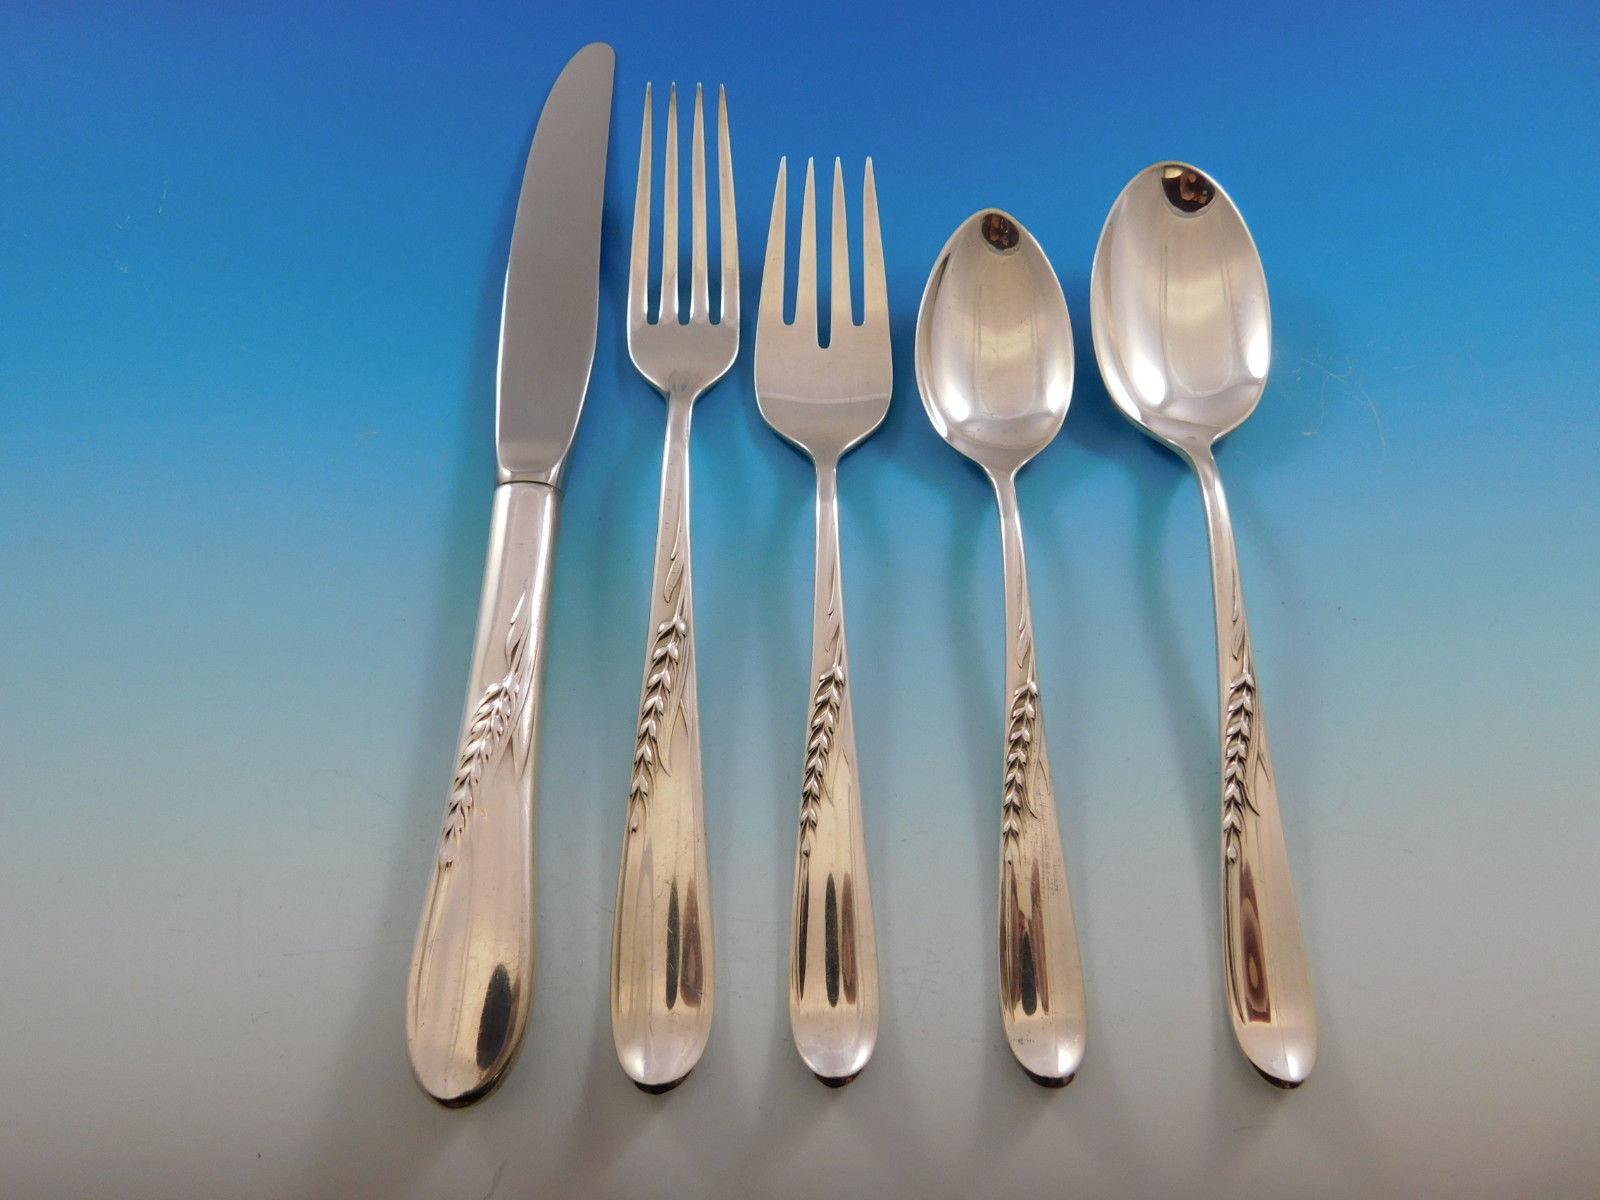 Superb silver wheat by Reed & Barton sterling silver flatware set, 66 pieces. This set includes:

12 knives, 8 3/4